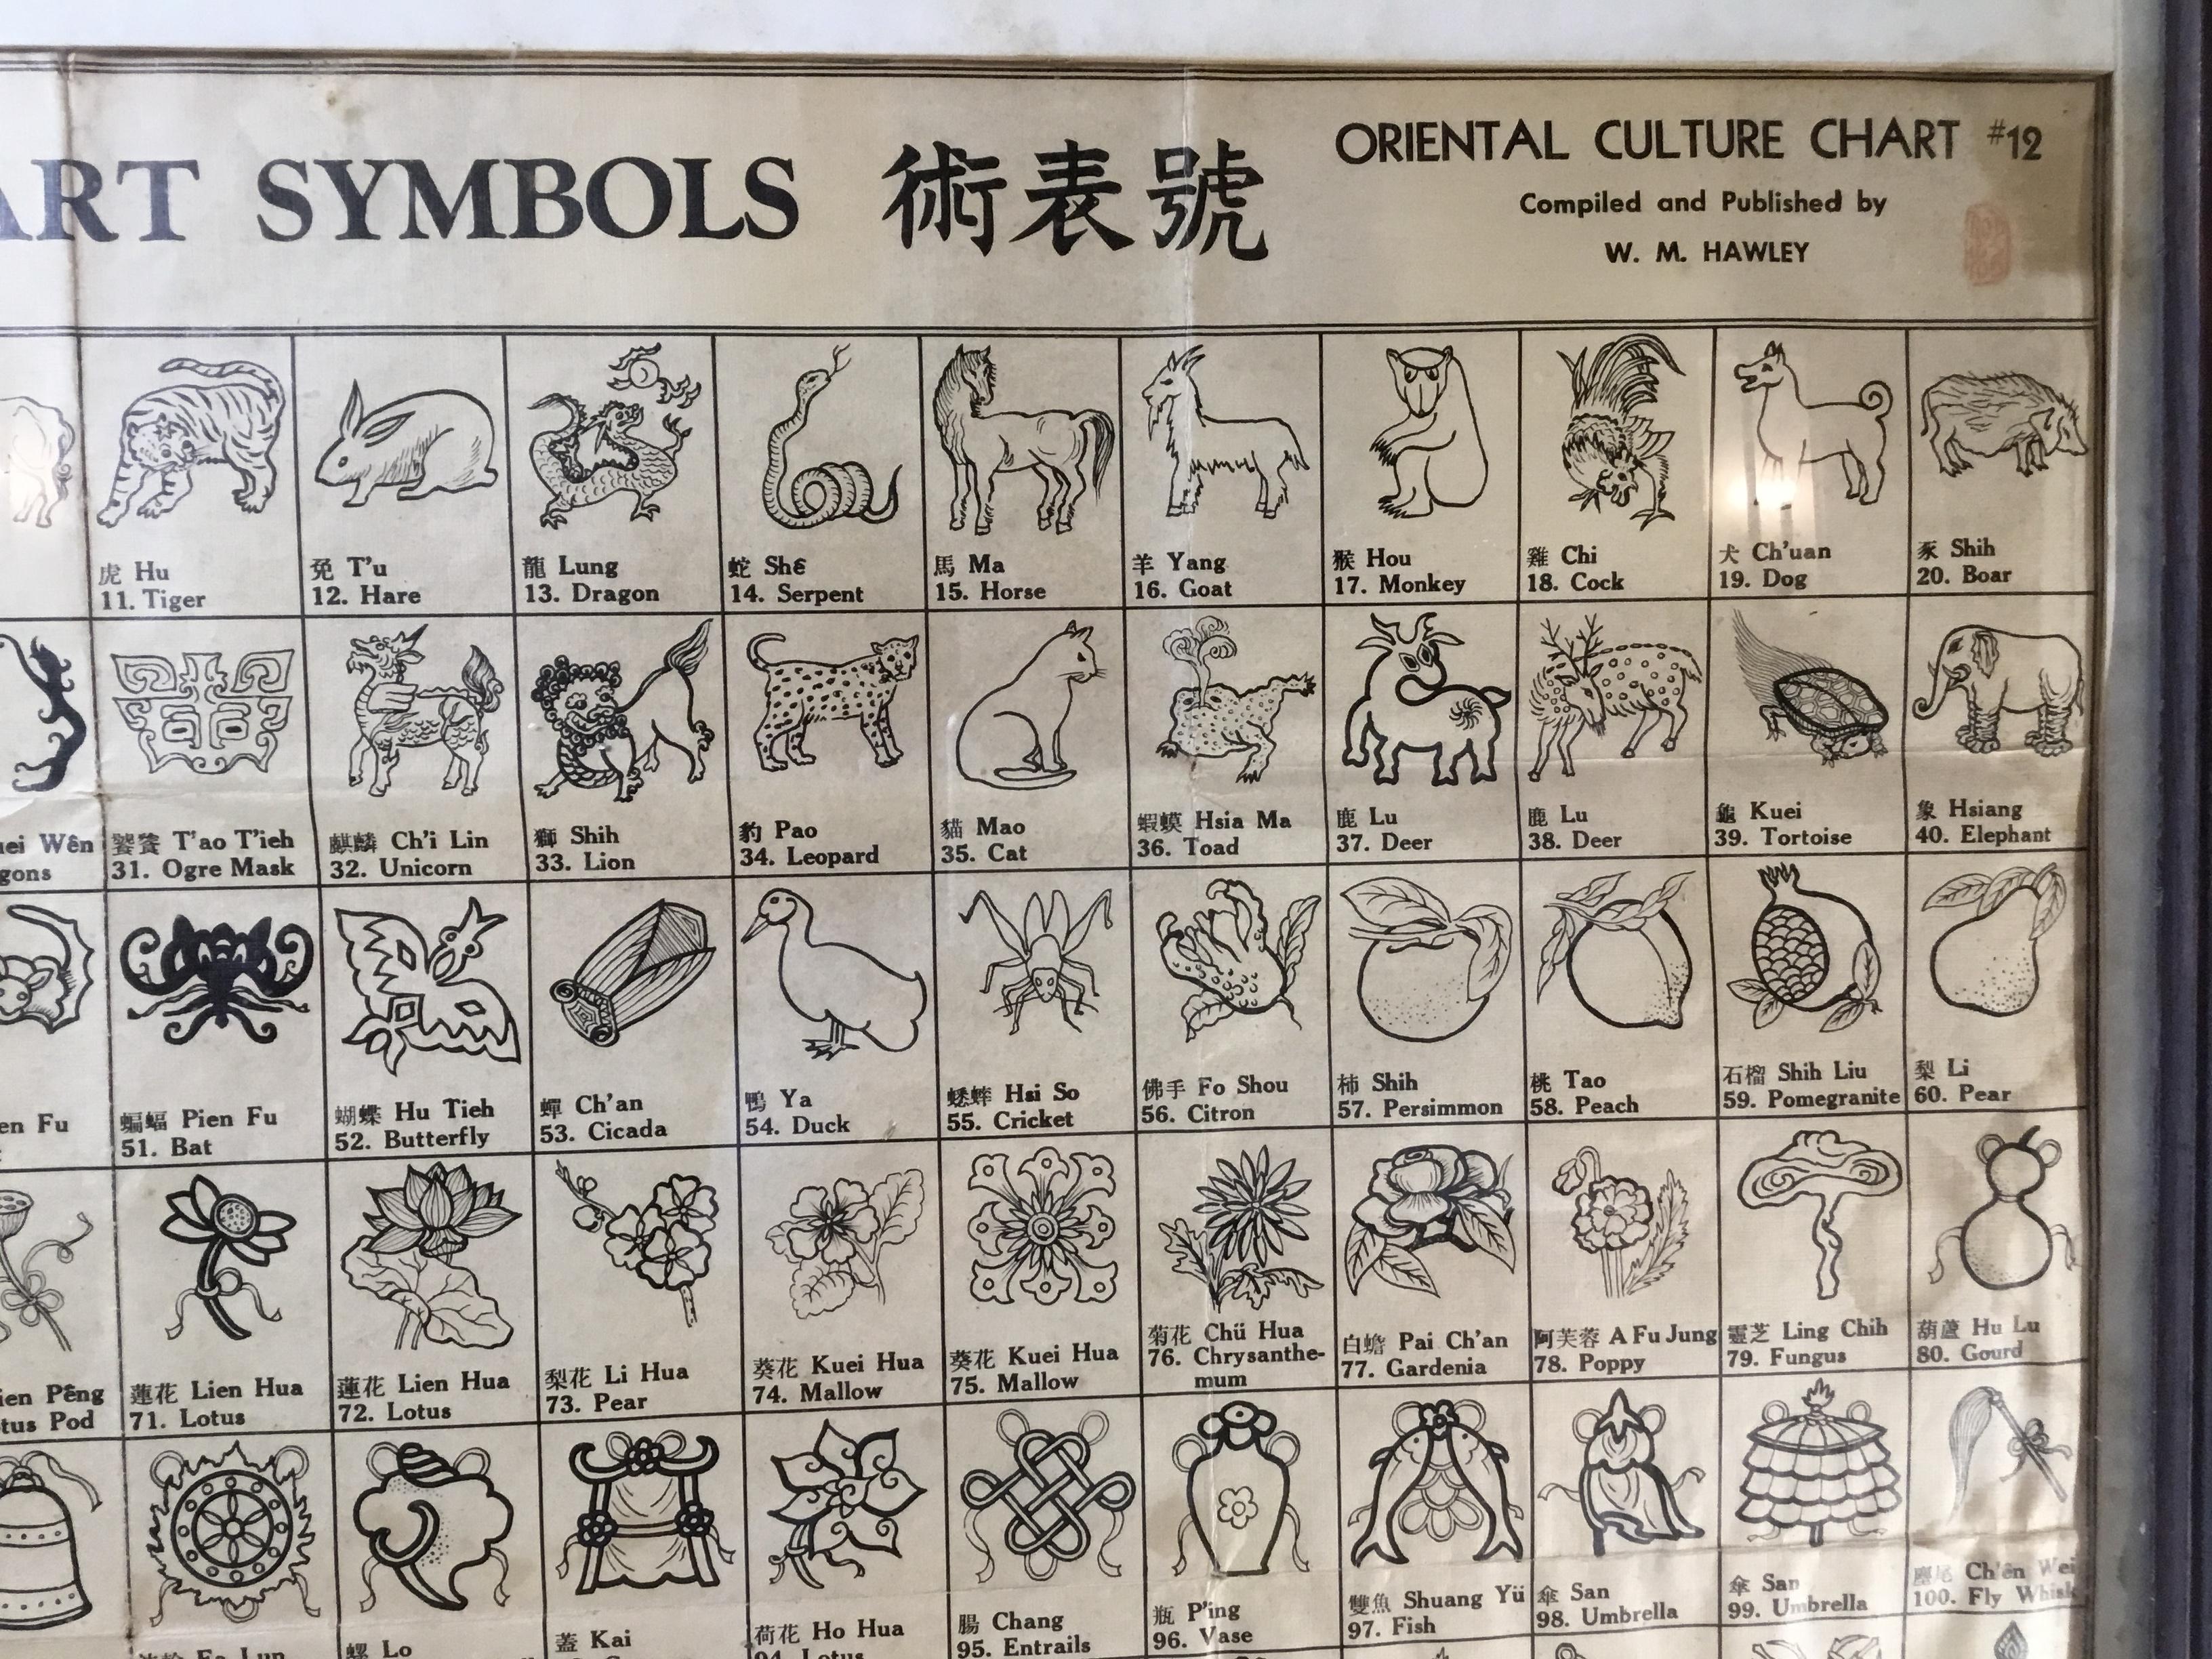 how many symbols in chinese